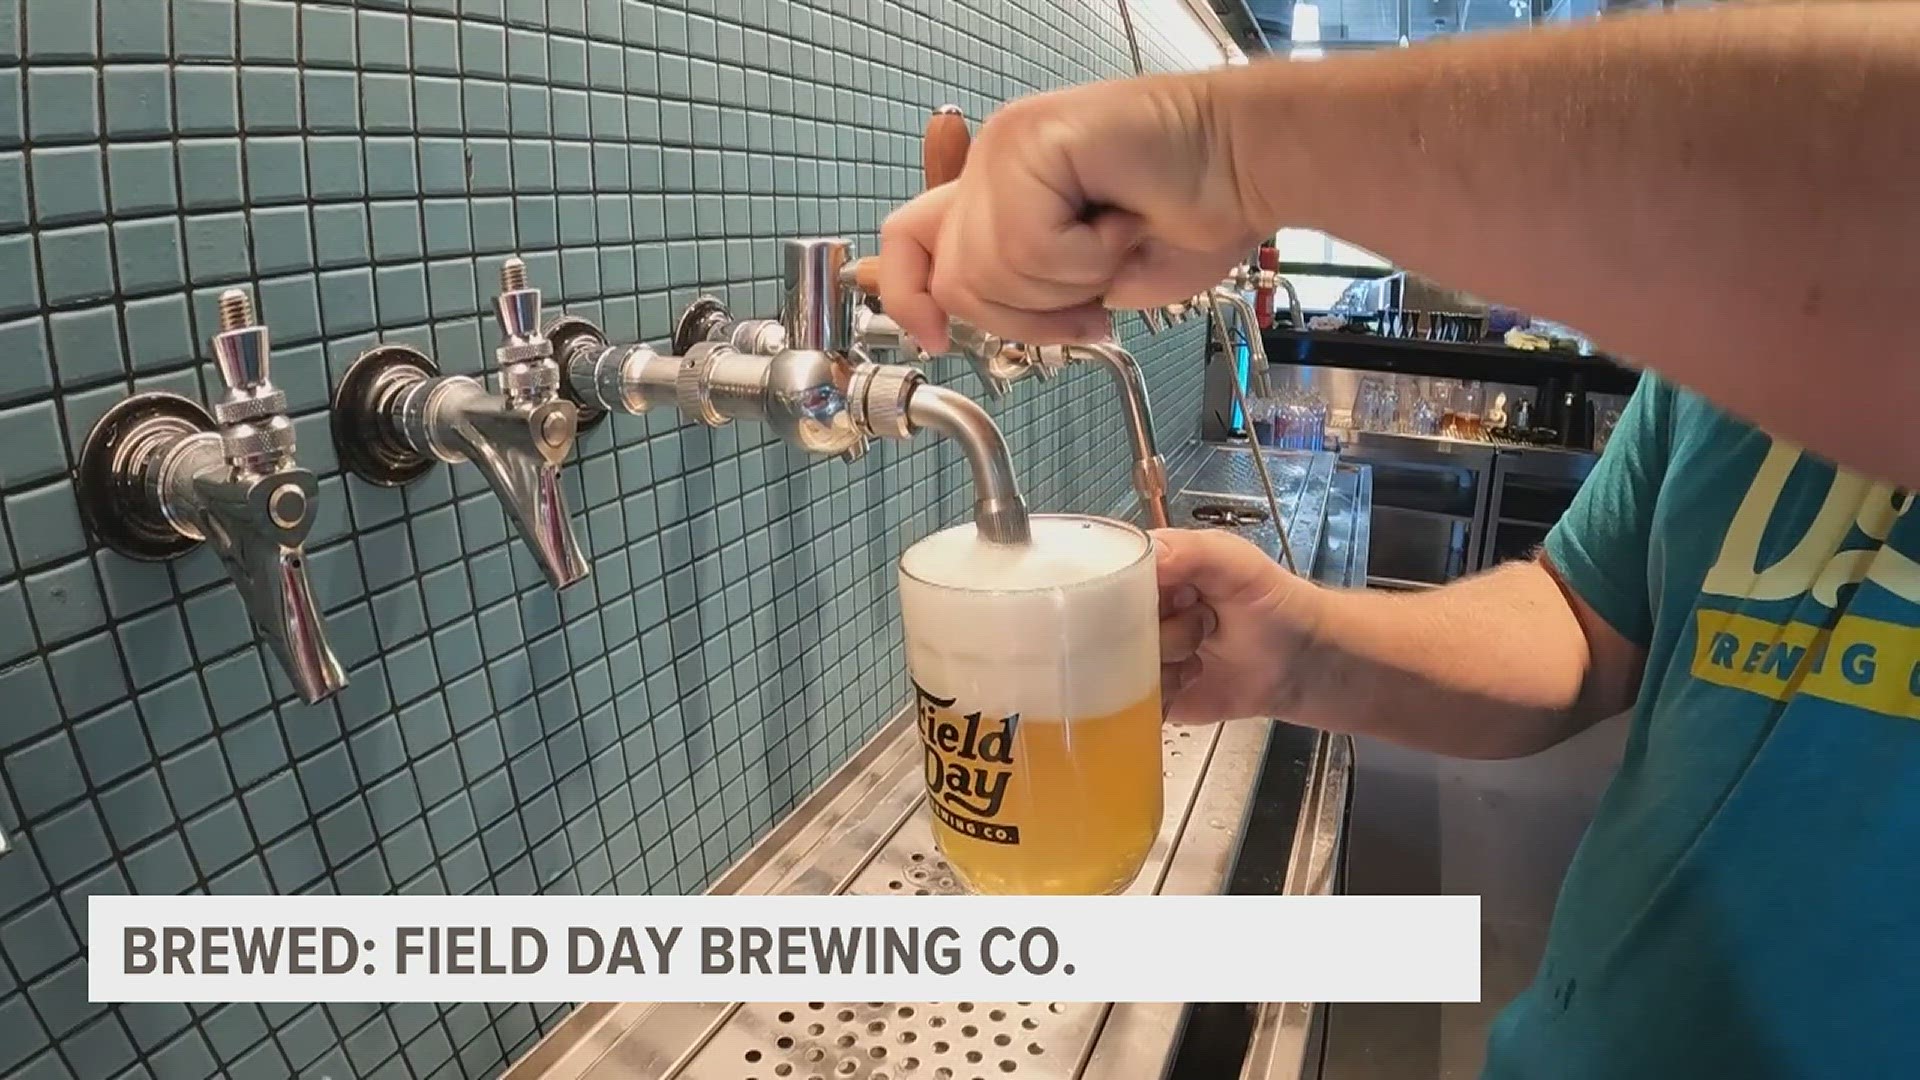 From the process of brewing to the glassware and taps, here's what sets the Field Day Brewing Company apart from others in Iowa.